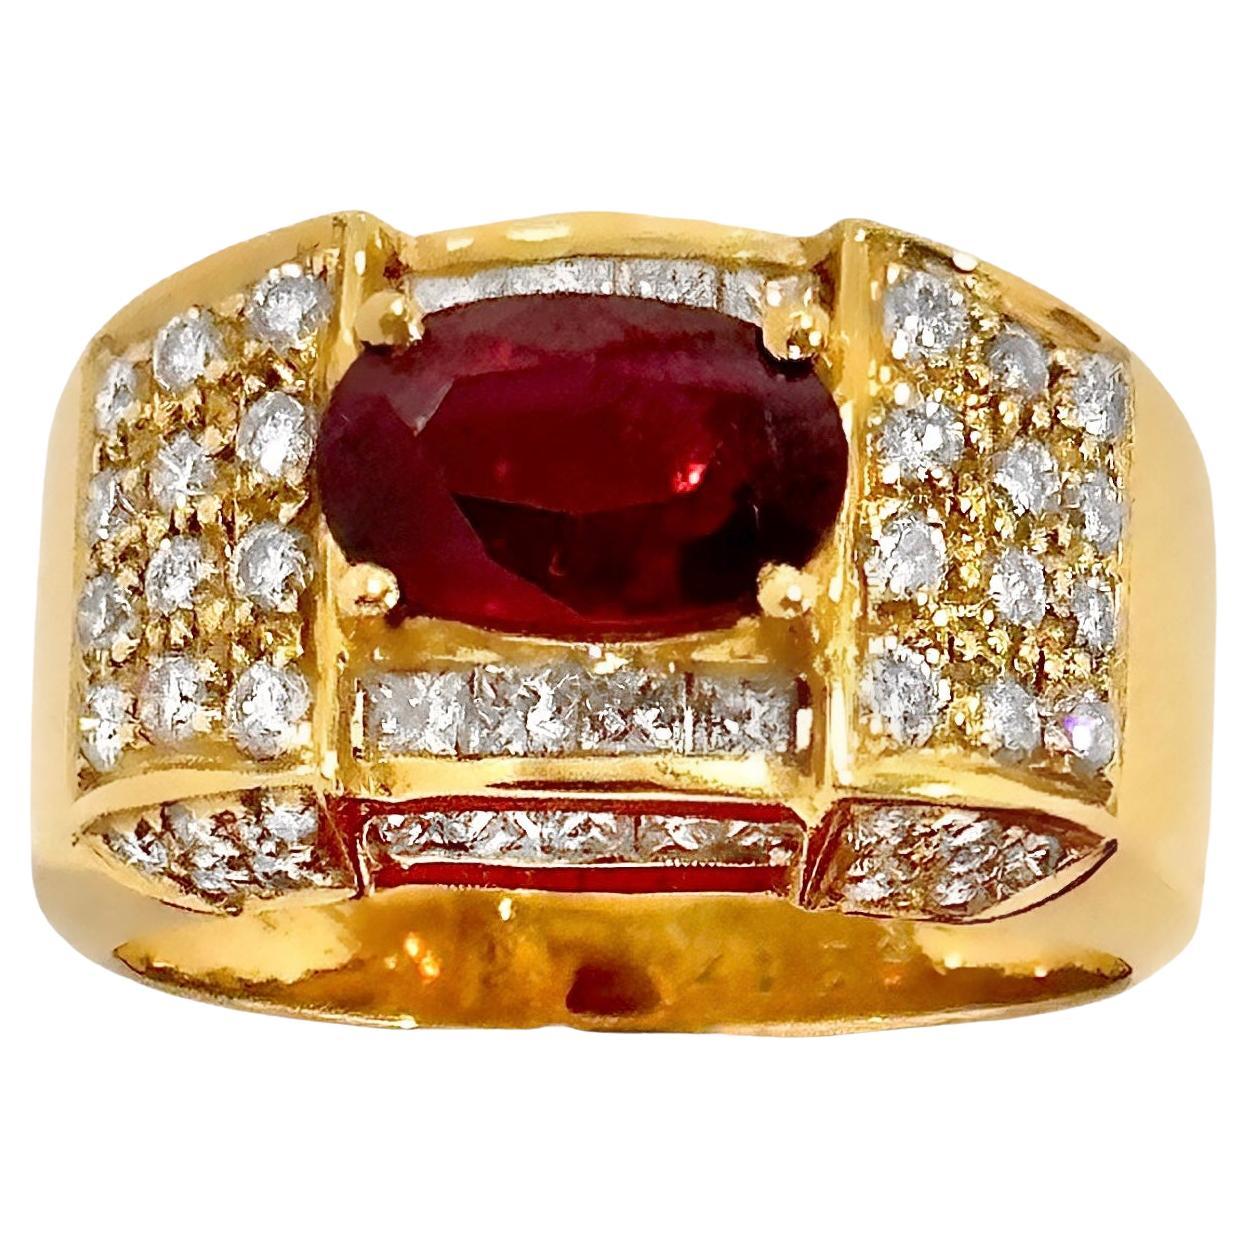 This lovely and stylish late-20th century 18k yellow gold cocktail ring is transverse set with one center oval faceted deep red ruby. This luxurious colored center stone is surrounded, both in the design area and in the ring walls, with brilliant